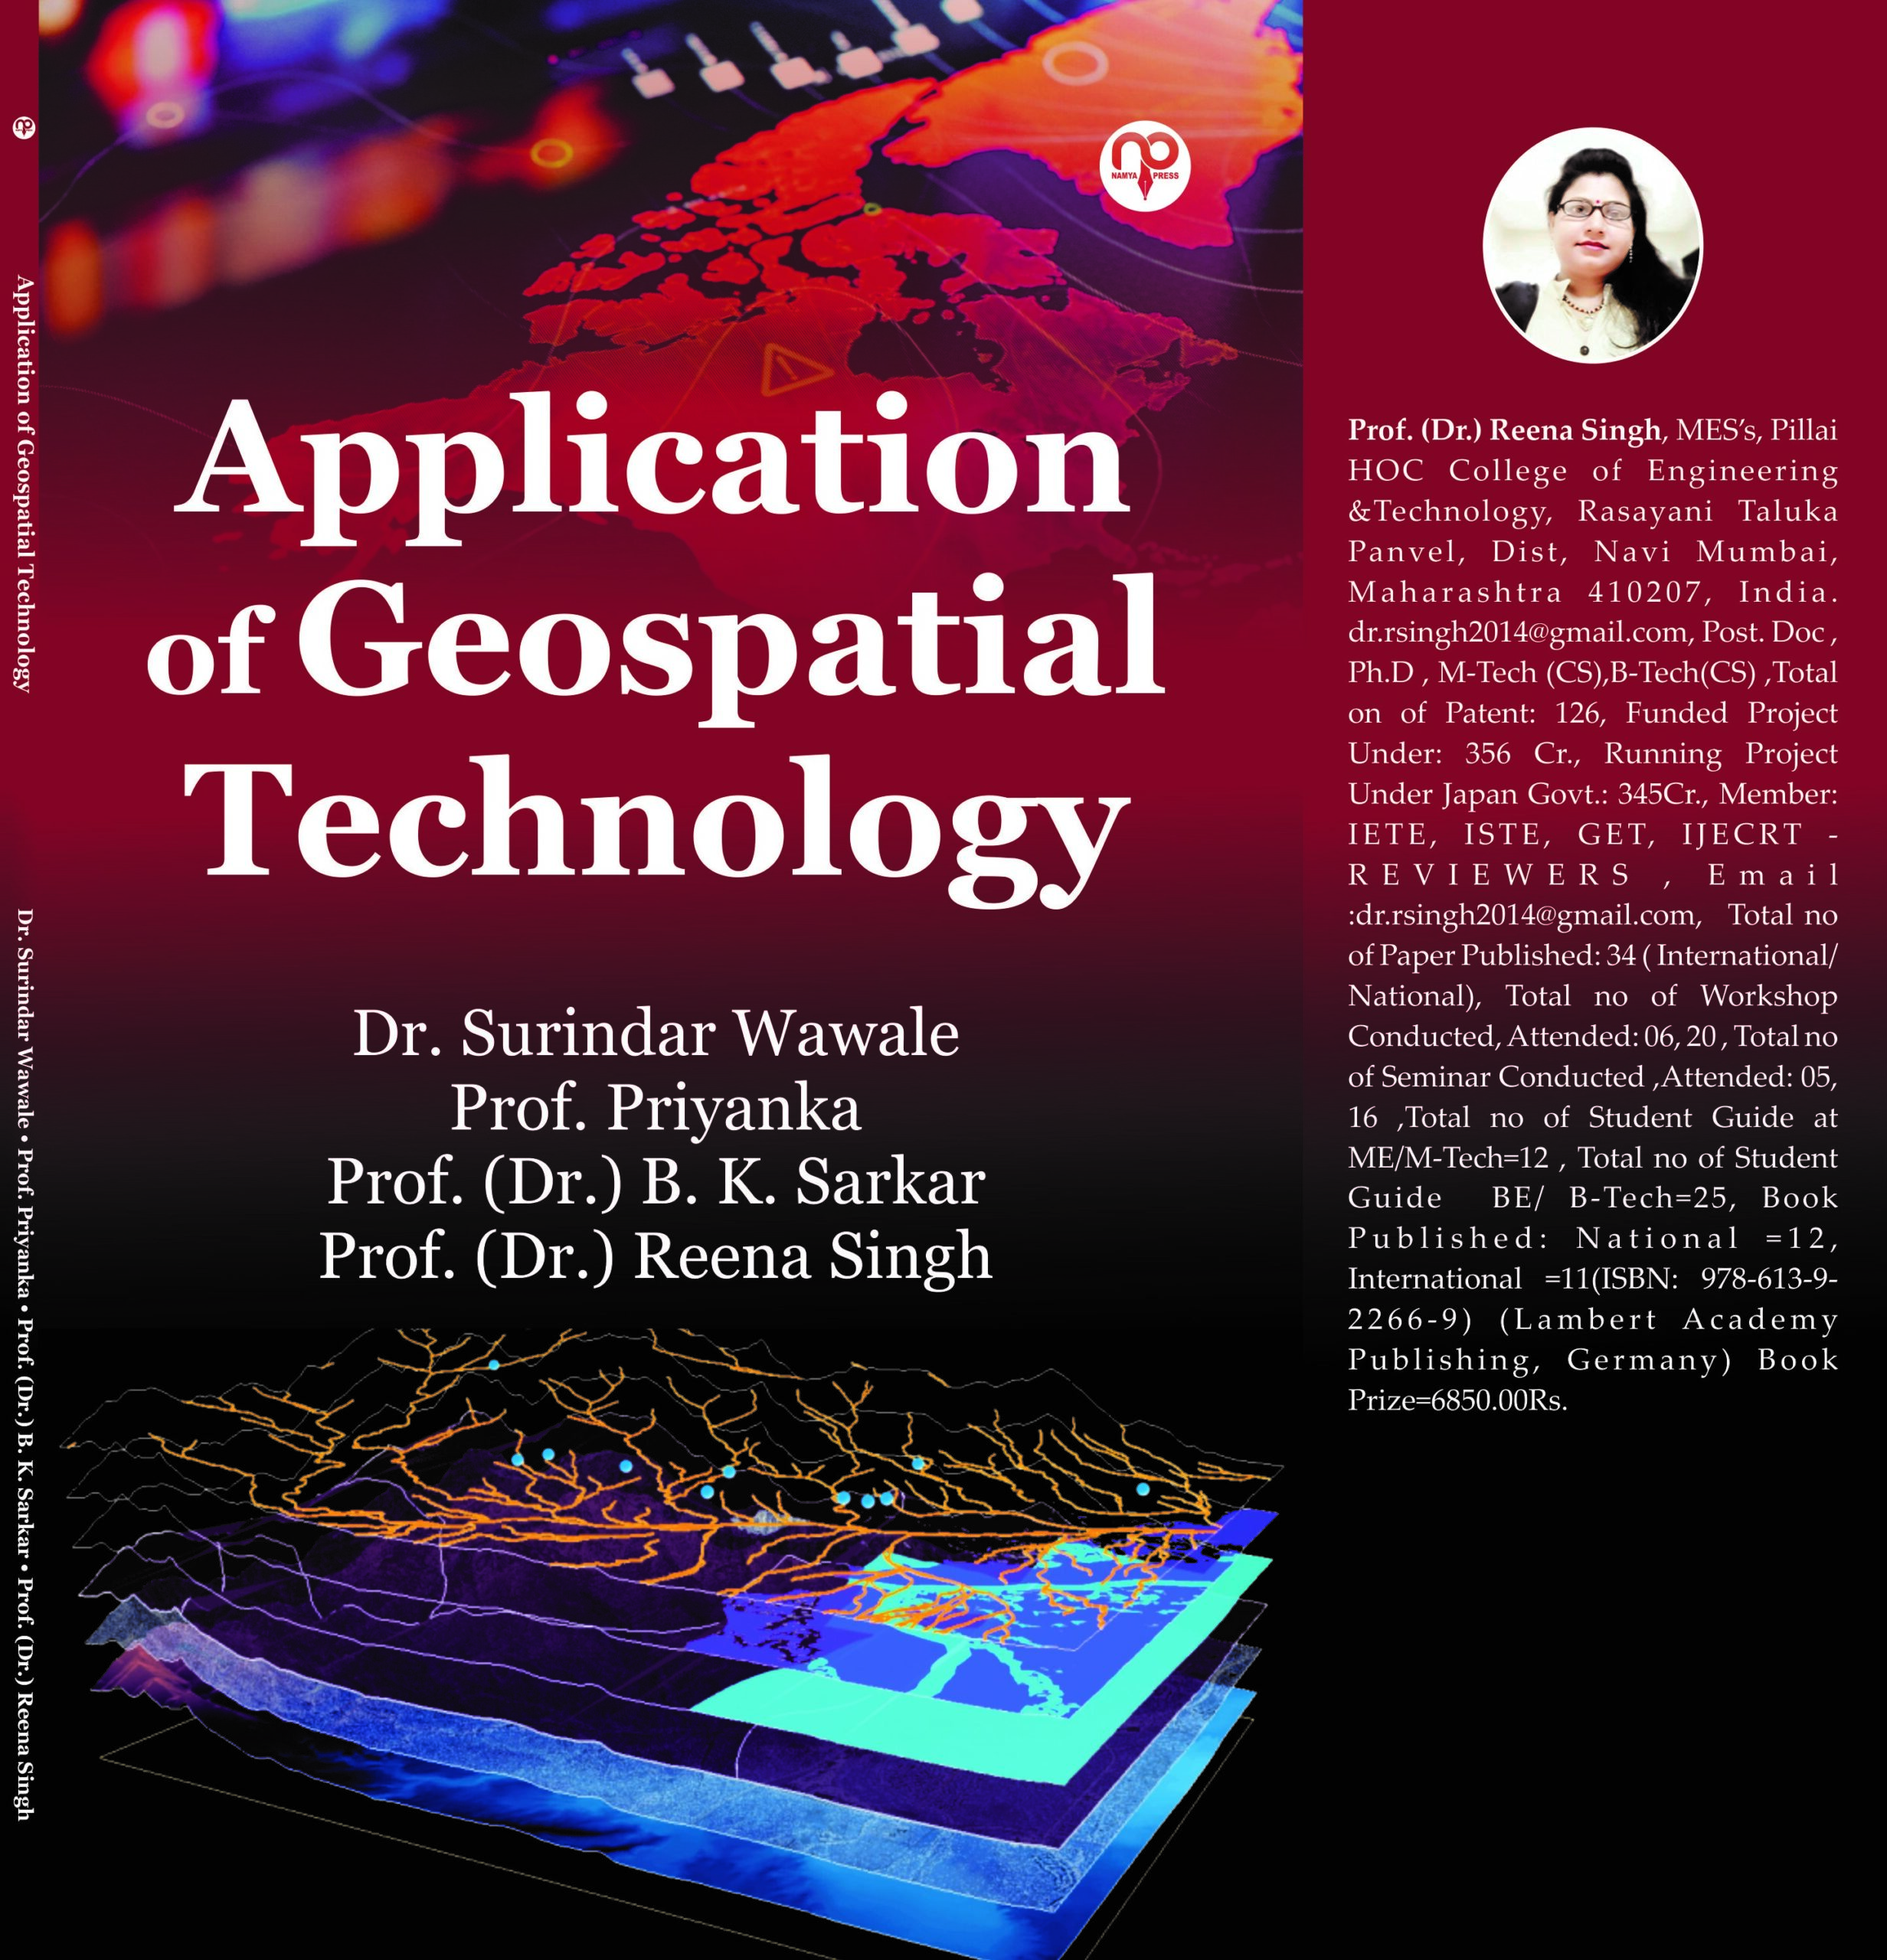 Application of Geospatial Technology